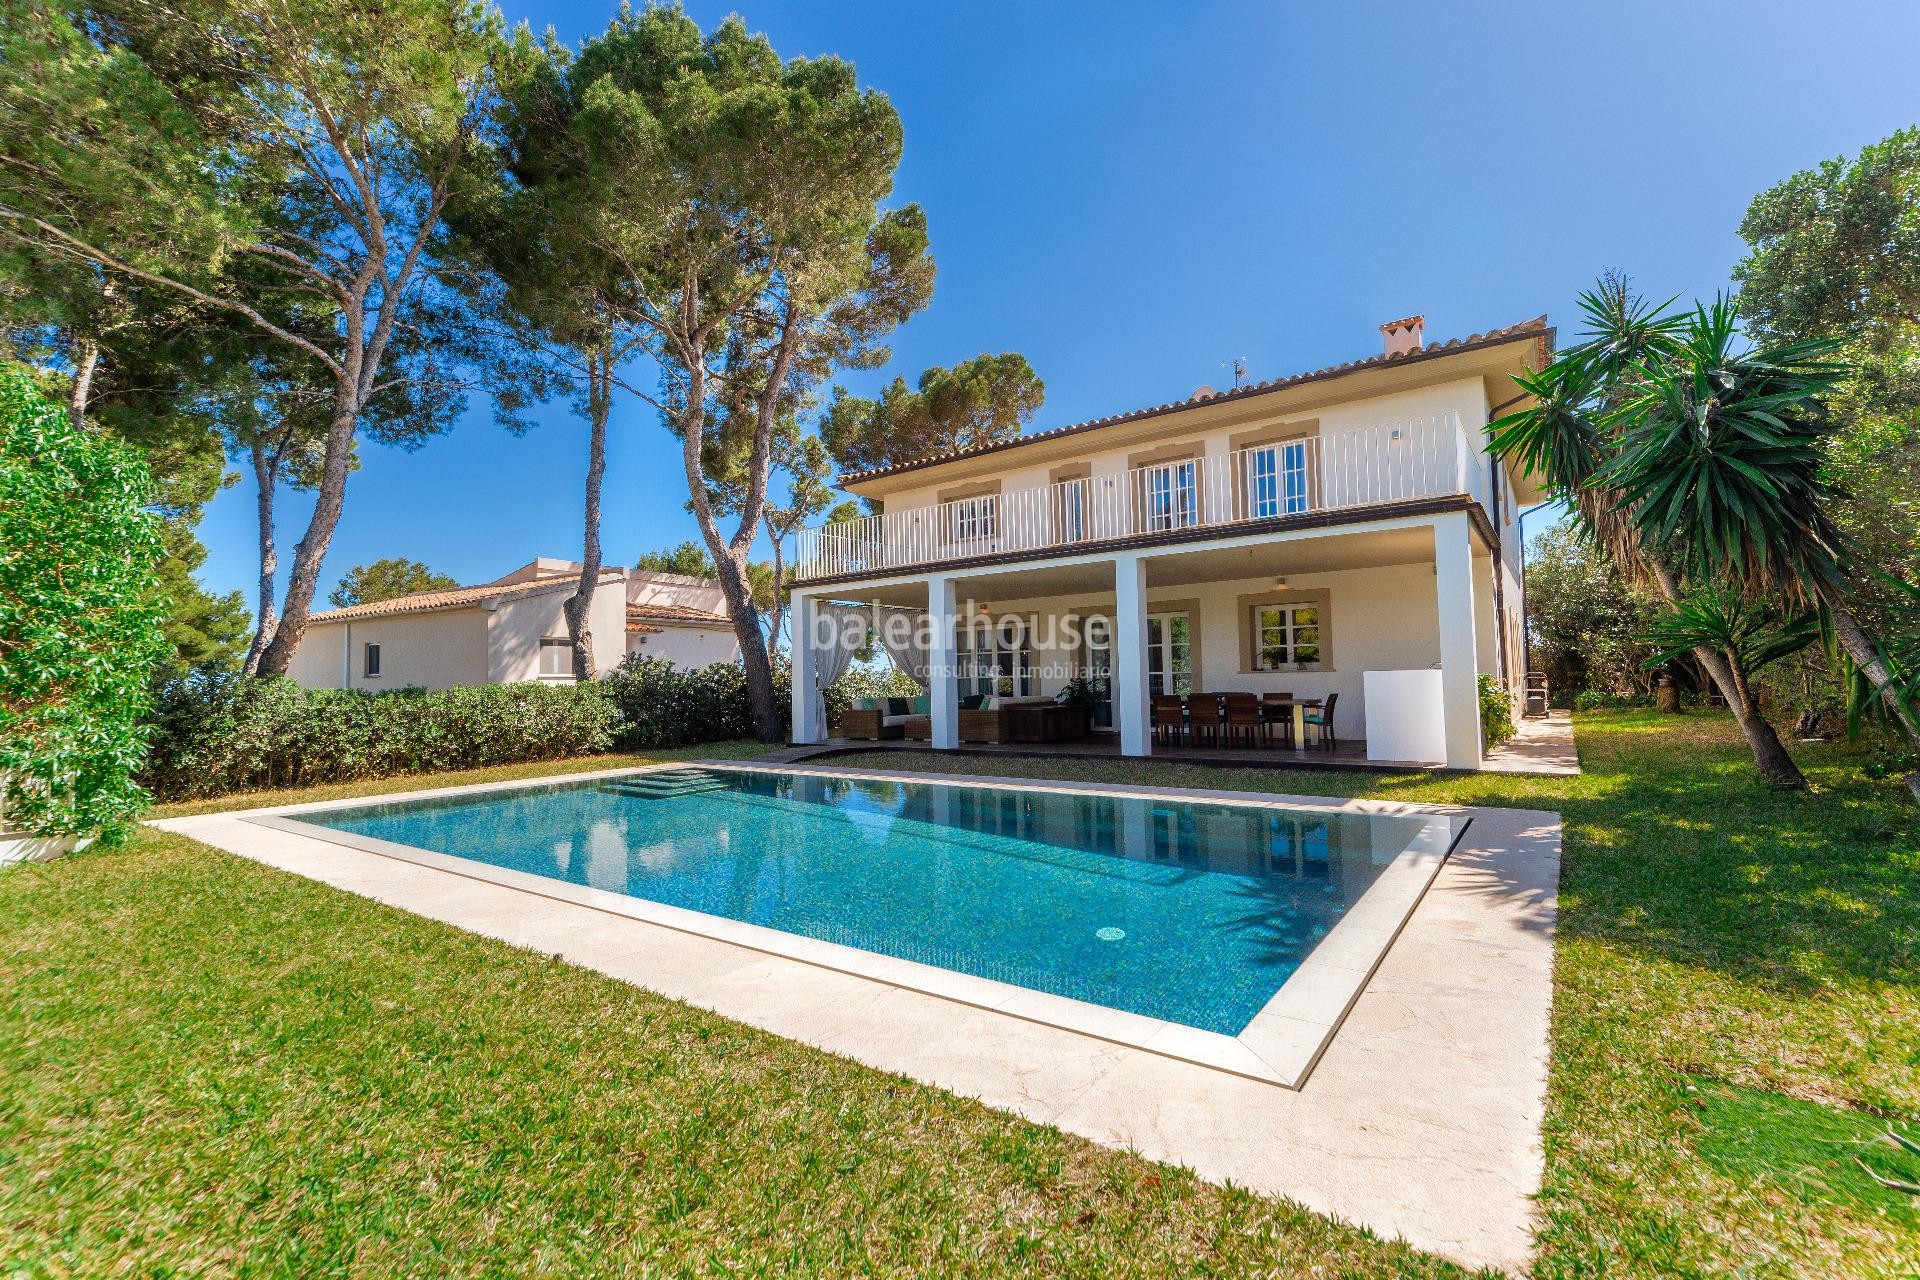 Mediterranean style villa with sea views perfect for families in Costa den Blanes